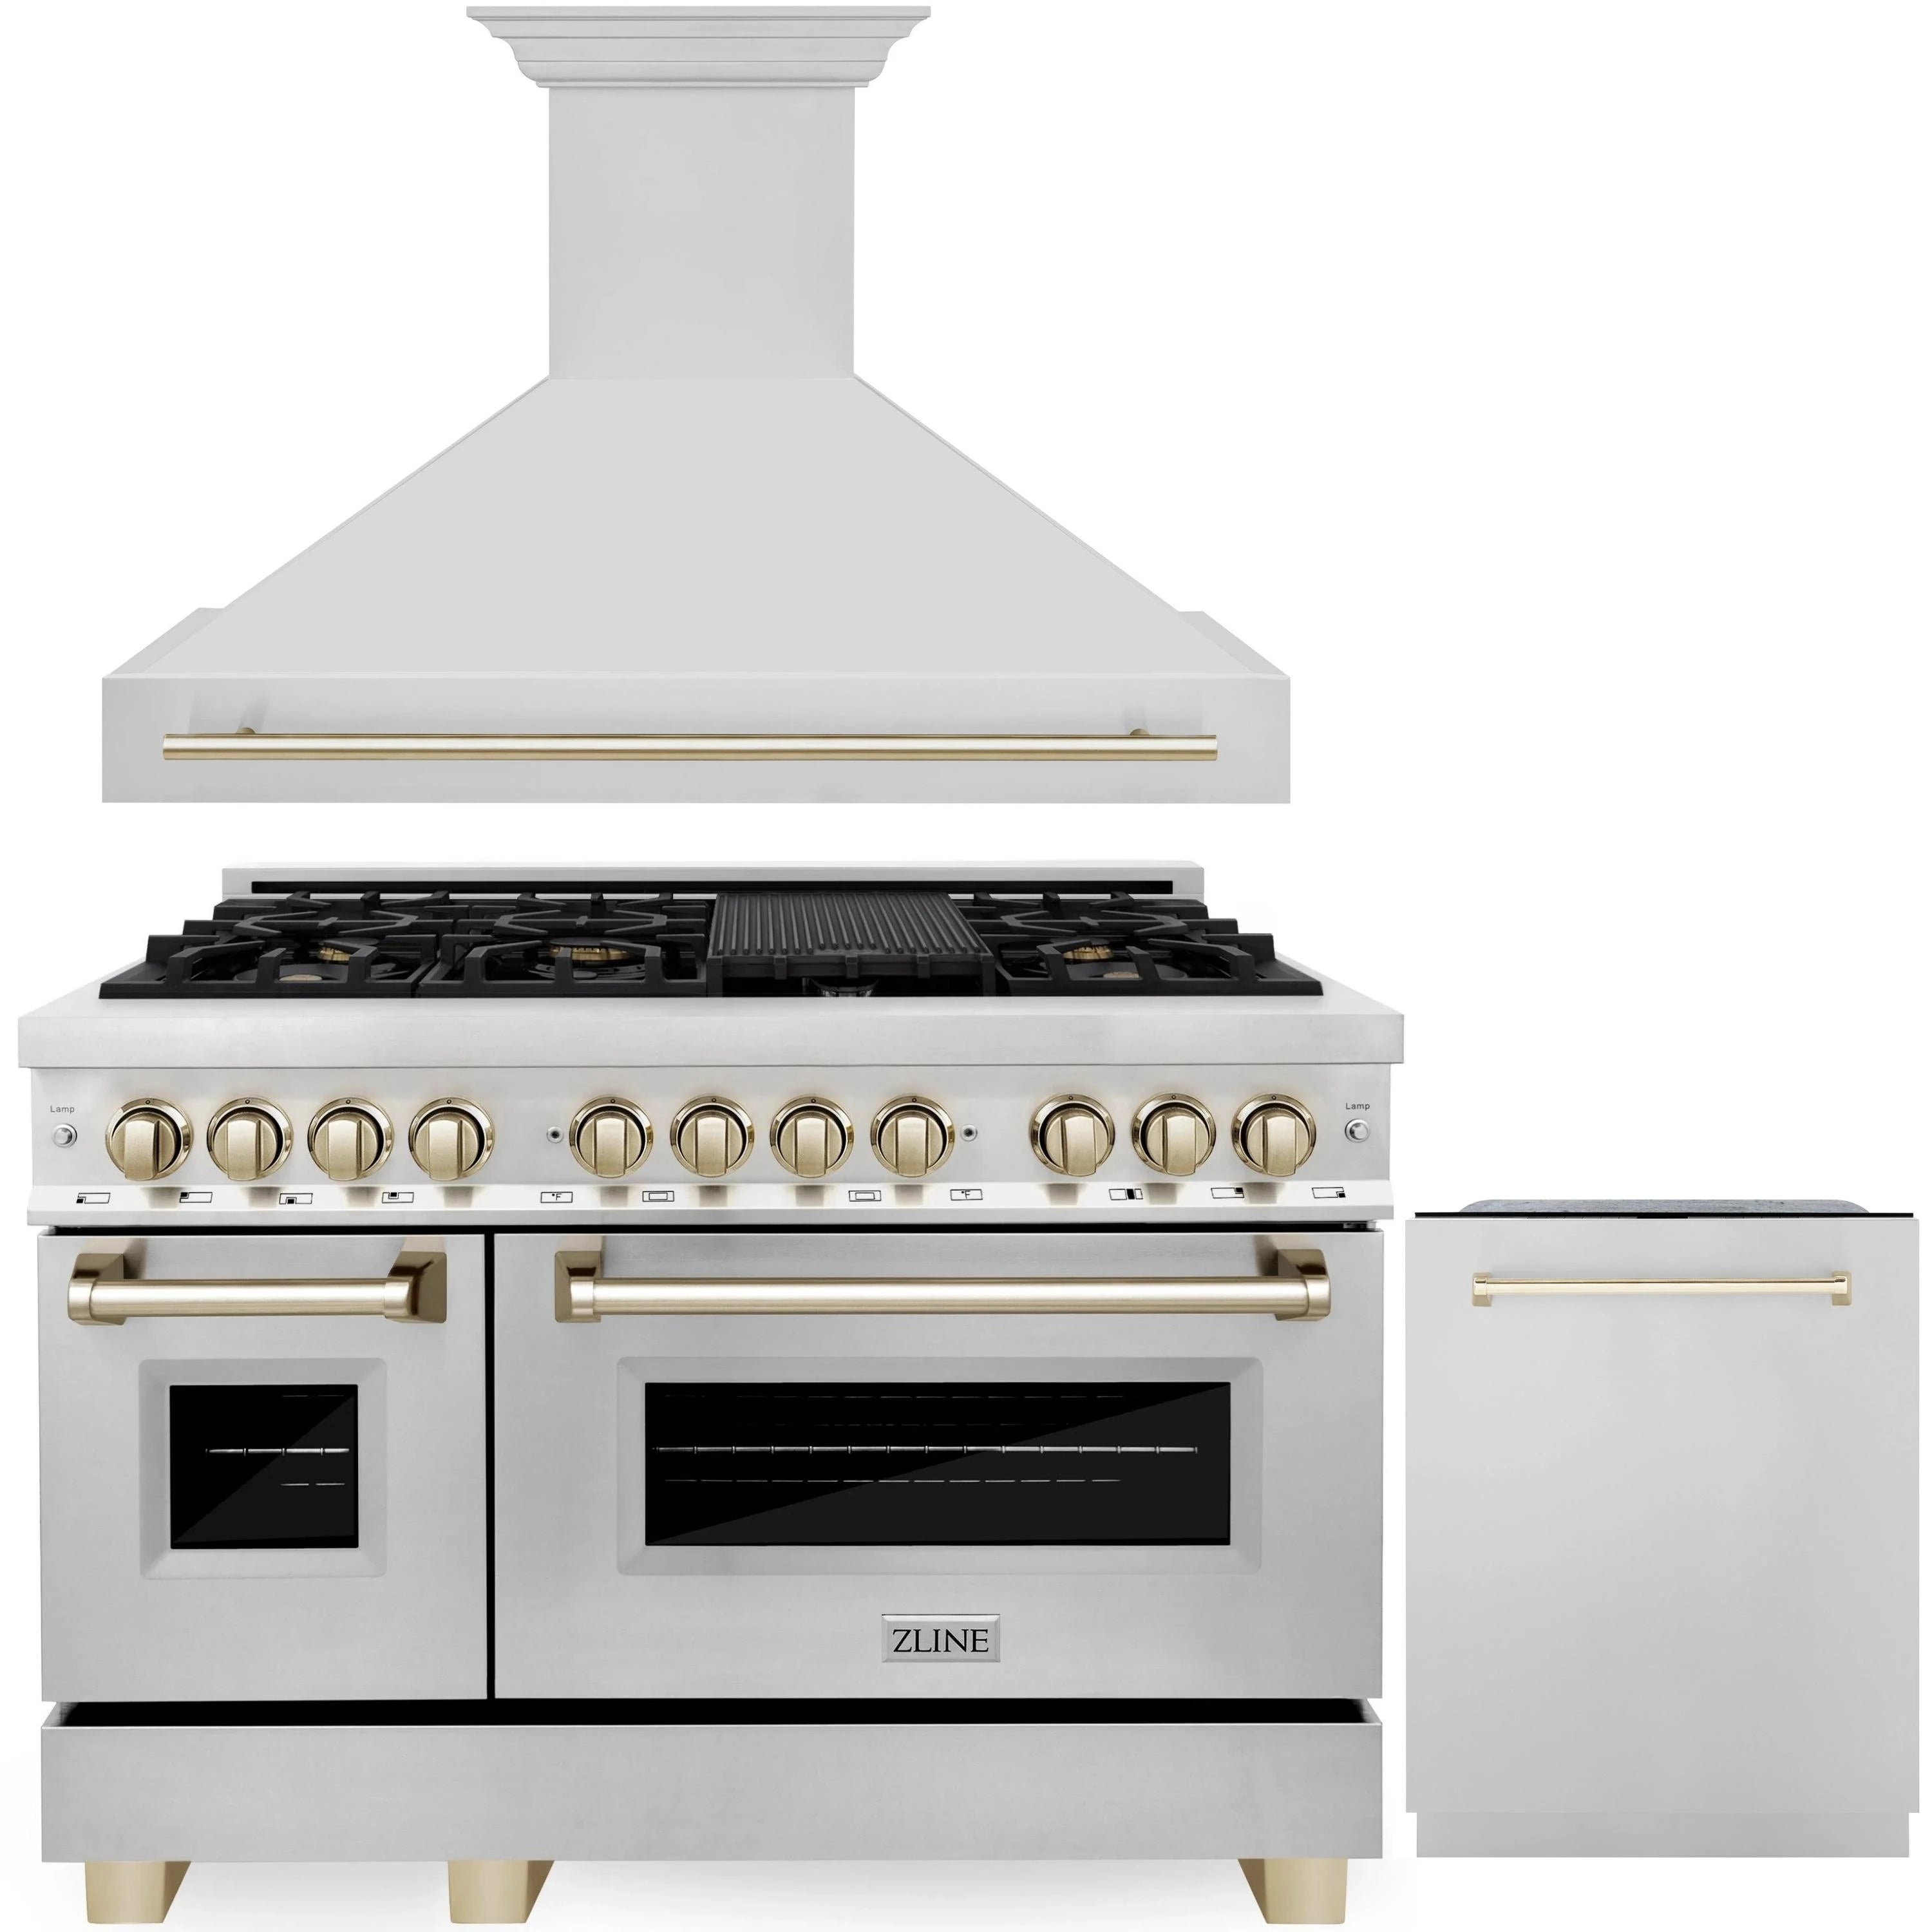 ZLINE Autograph Edition 3-Piece Appliance Package - 48-Inch Dual Fuel Range, Wall Mounted Range Hood, & 24-Inch Tall Tub Dishwasher in Stainless Steel with Gold Trim (3AKP-RARHDWM48-G)